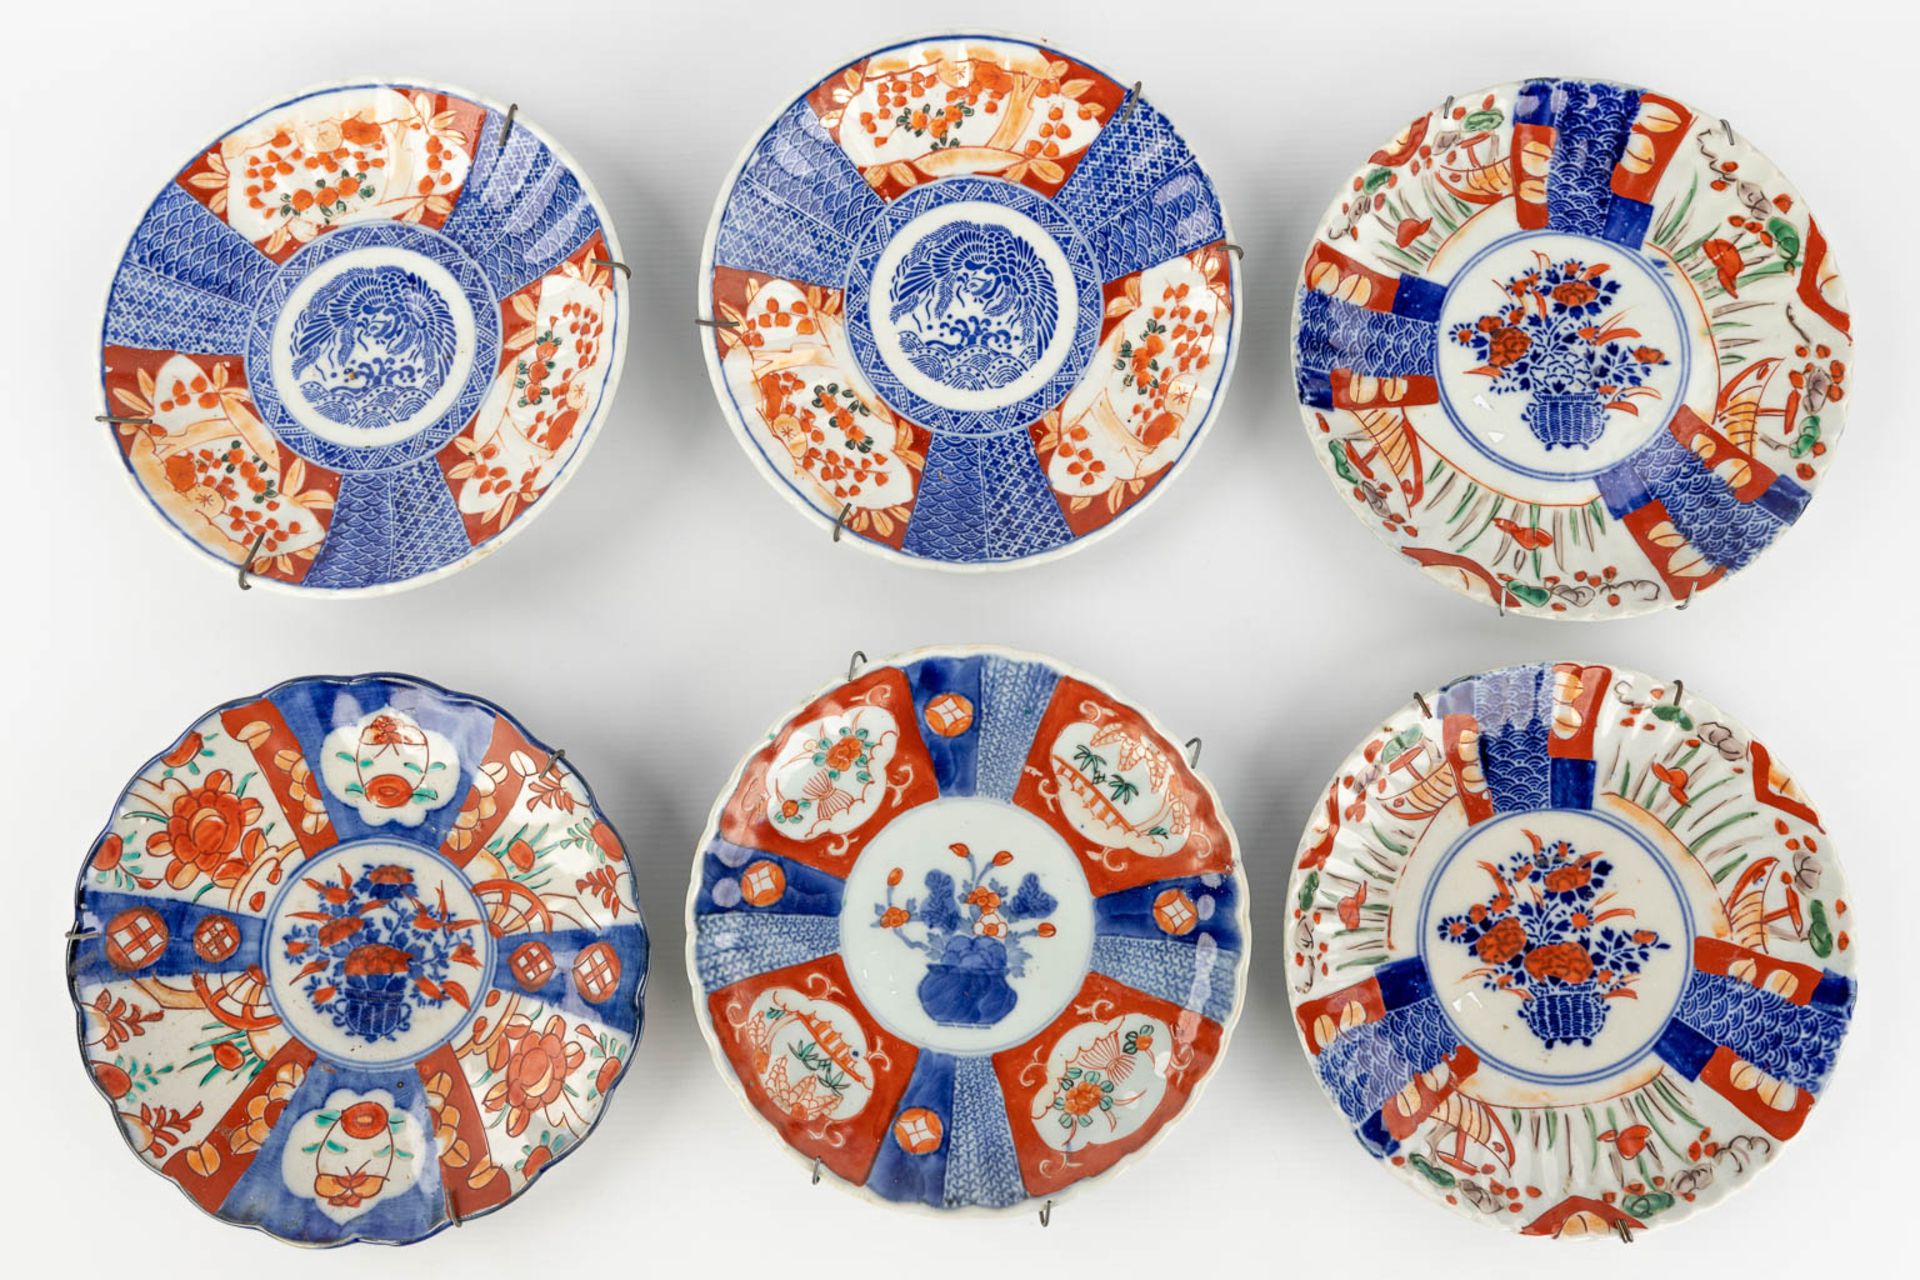 An assembled collection of Japanese Imari and Kutani porcelain. 19th/20th century. (H: 35 x D: 19 cm - Image 19 of 22